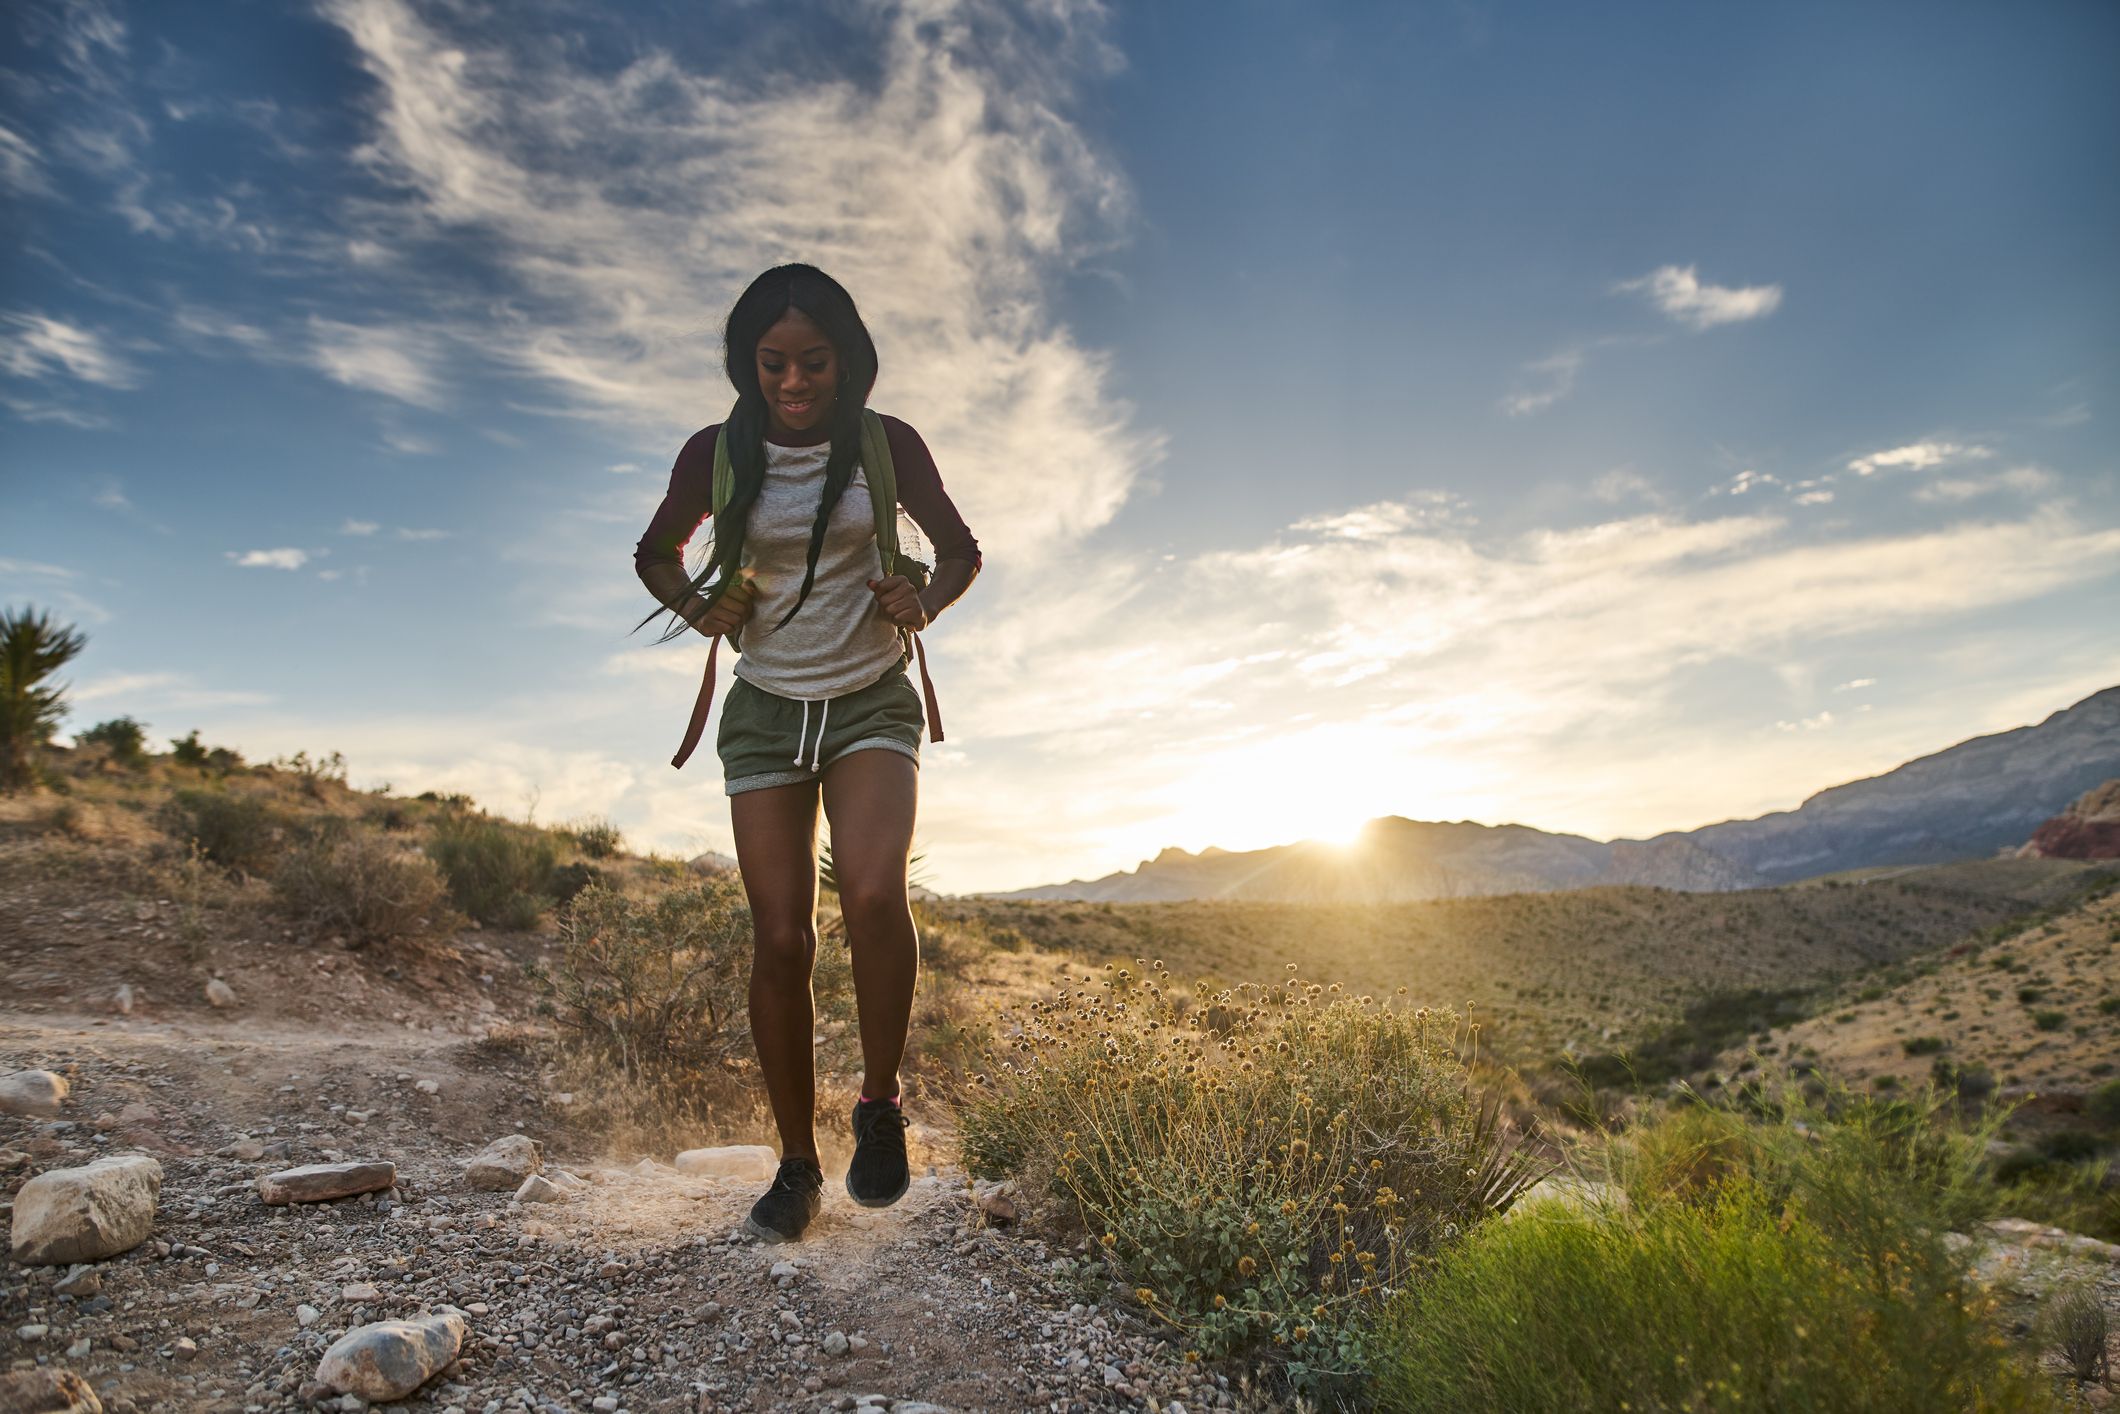 How to Alight Hiking - Tips for Using Hiking as Cross-Training